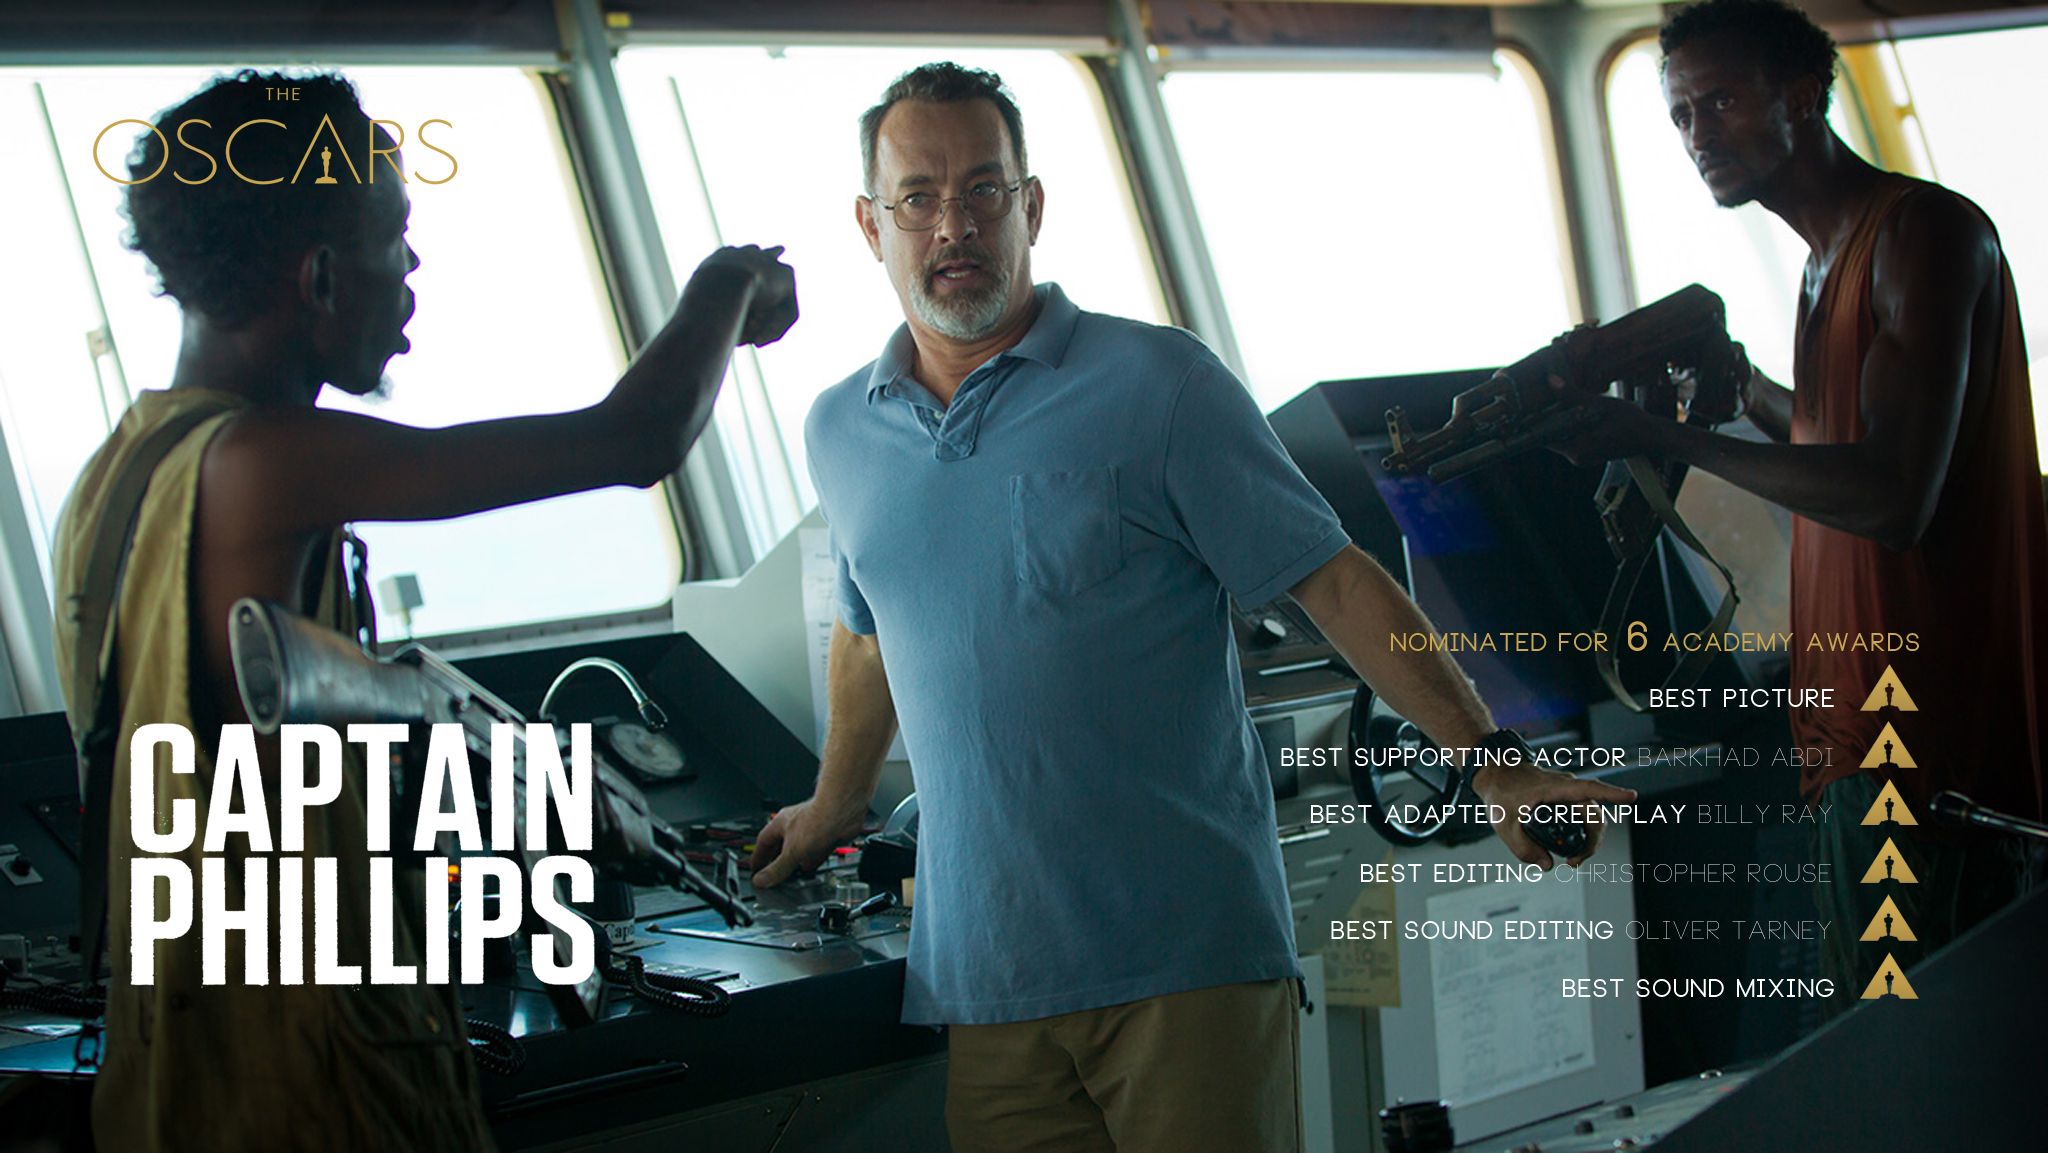 Captain Phillips nominated for 6 Academy Awards